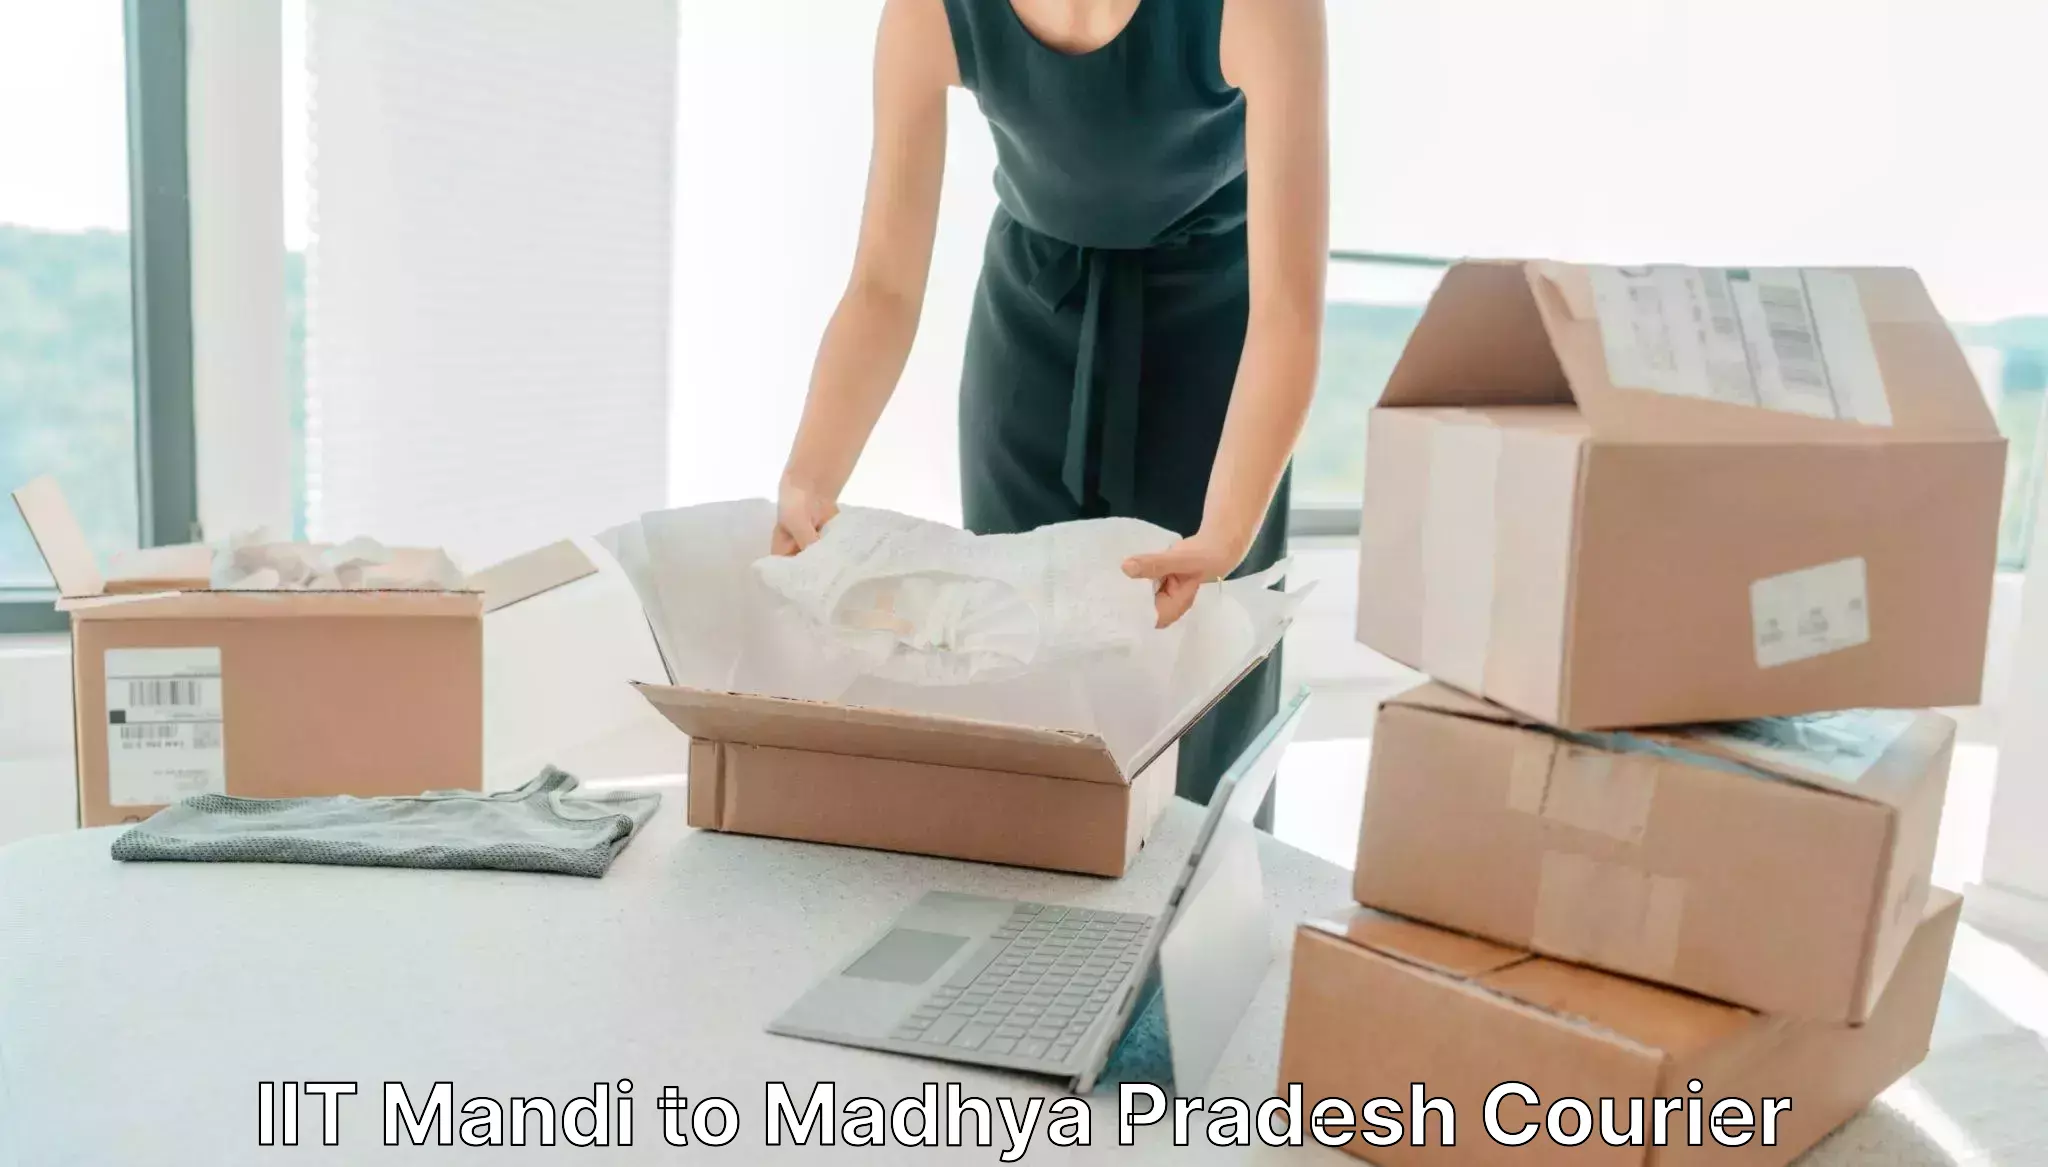 Express delivery solutions IIT Mandi to Neemuch